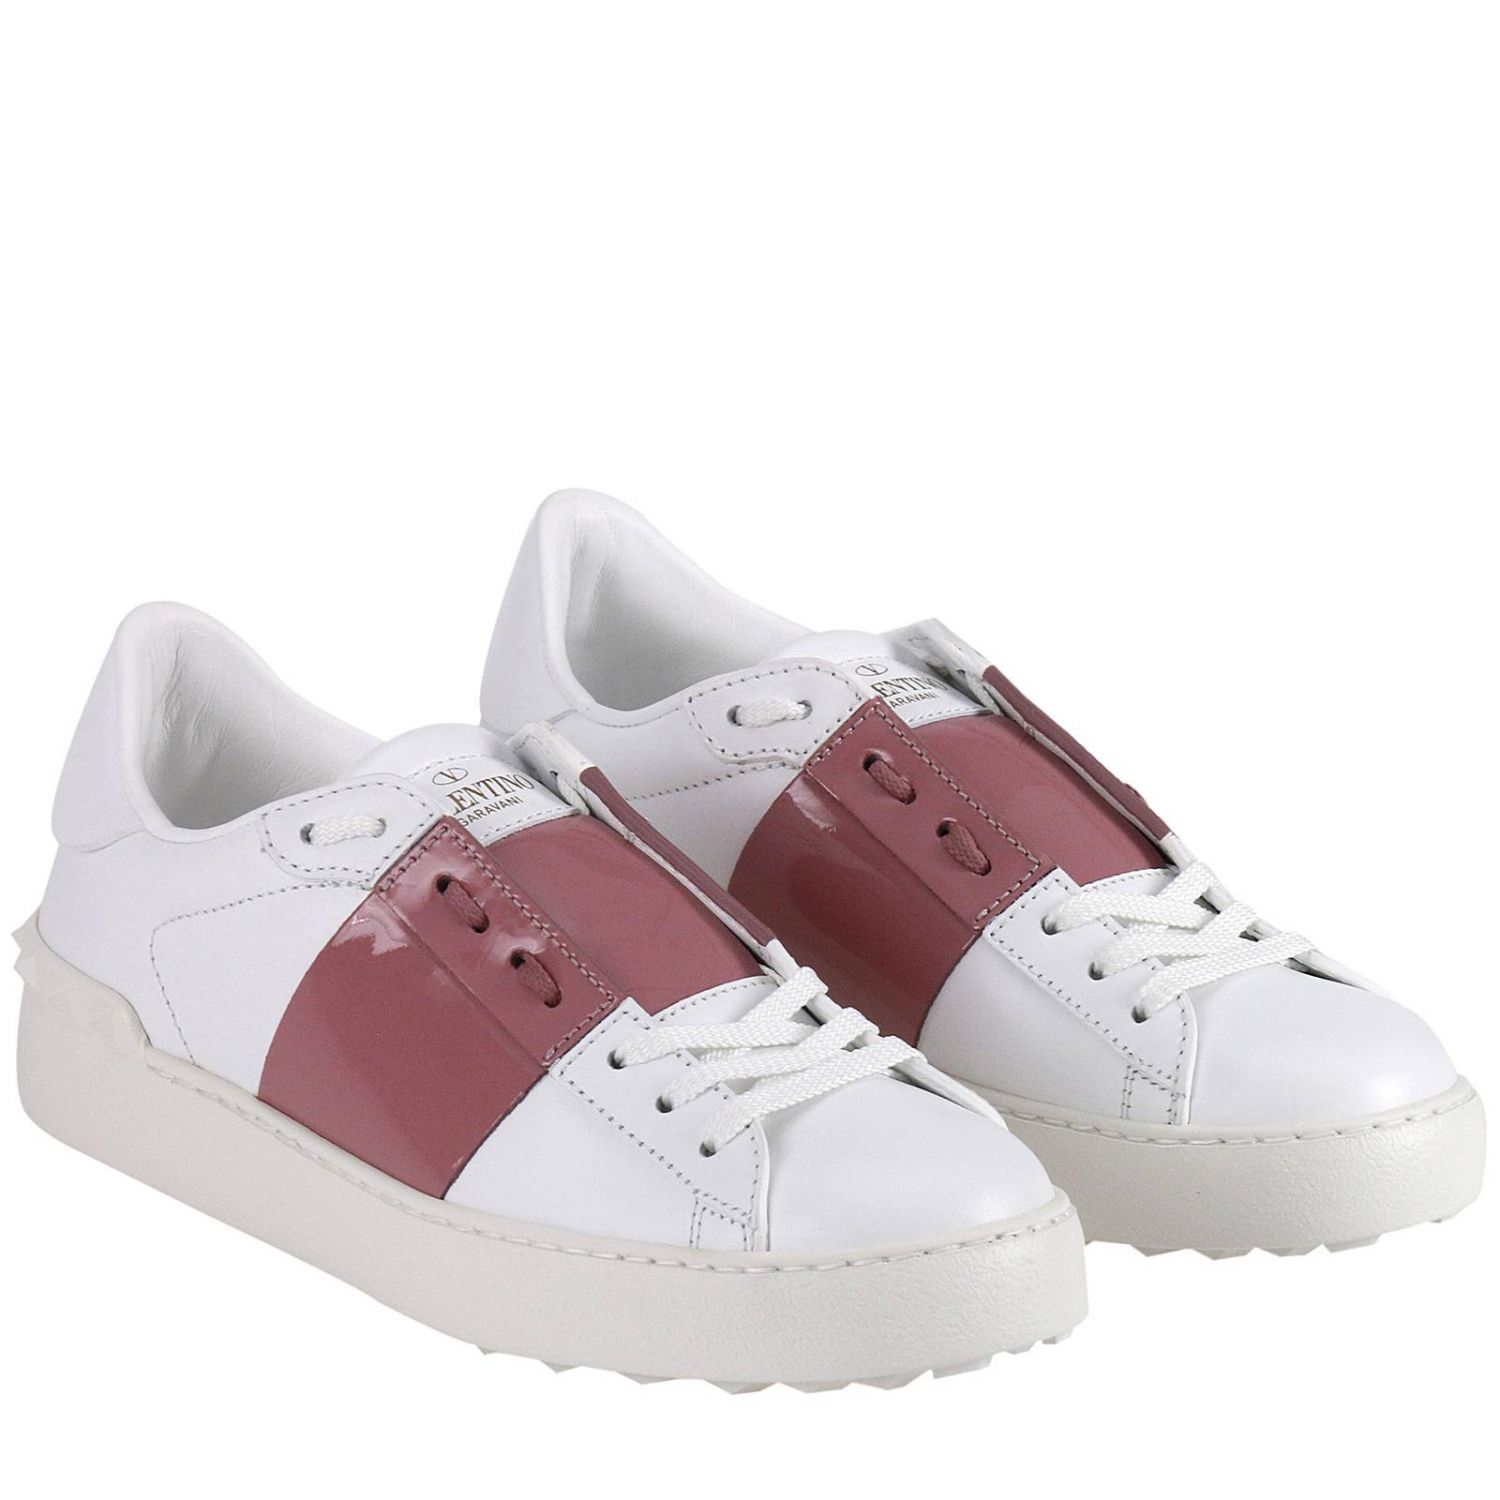 VALENTINO GARAVANI: Rockstud Open Sneakers with tone on tone studs and ...